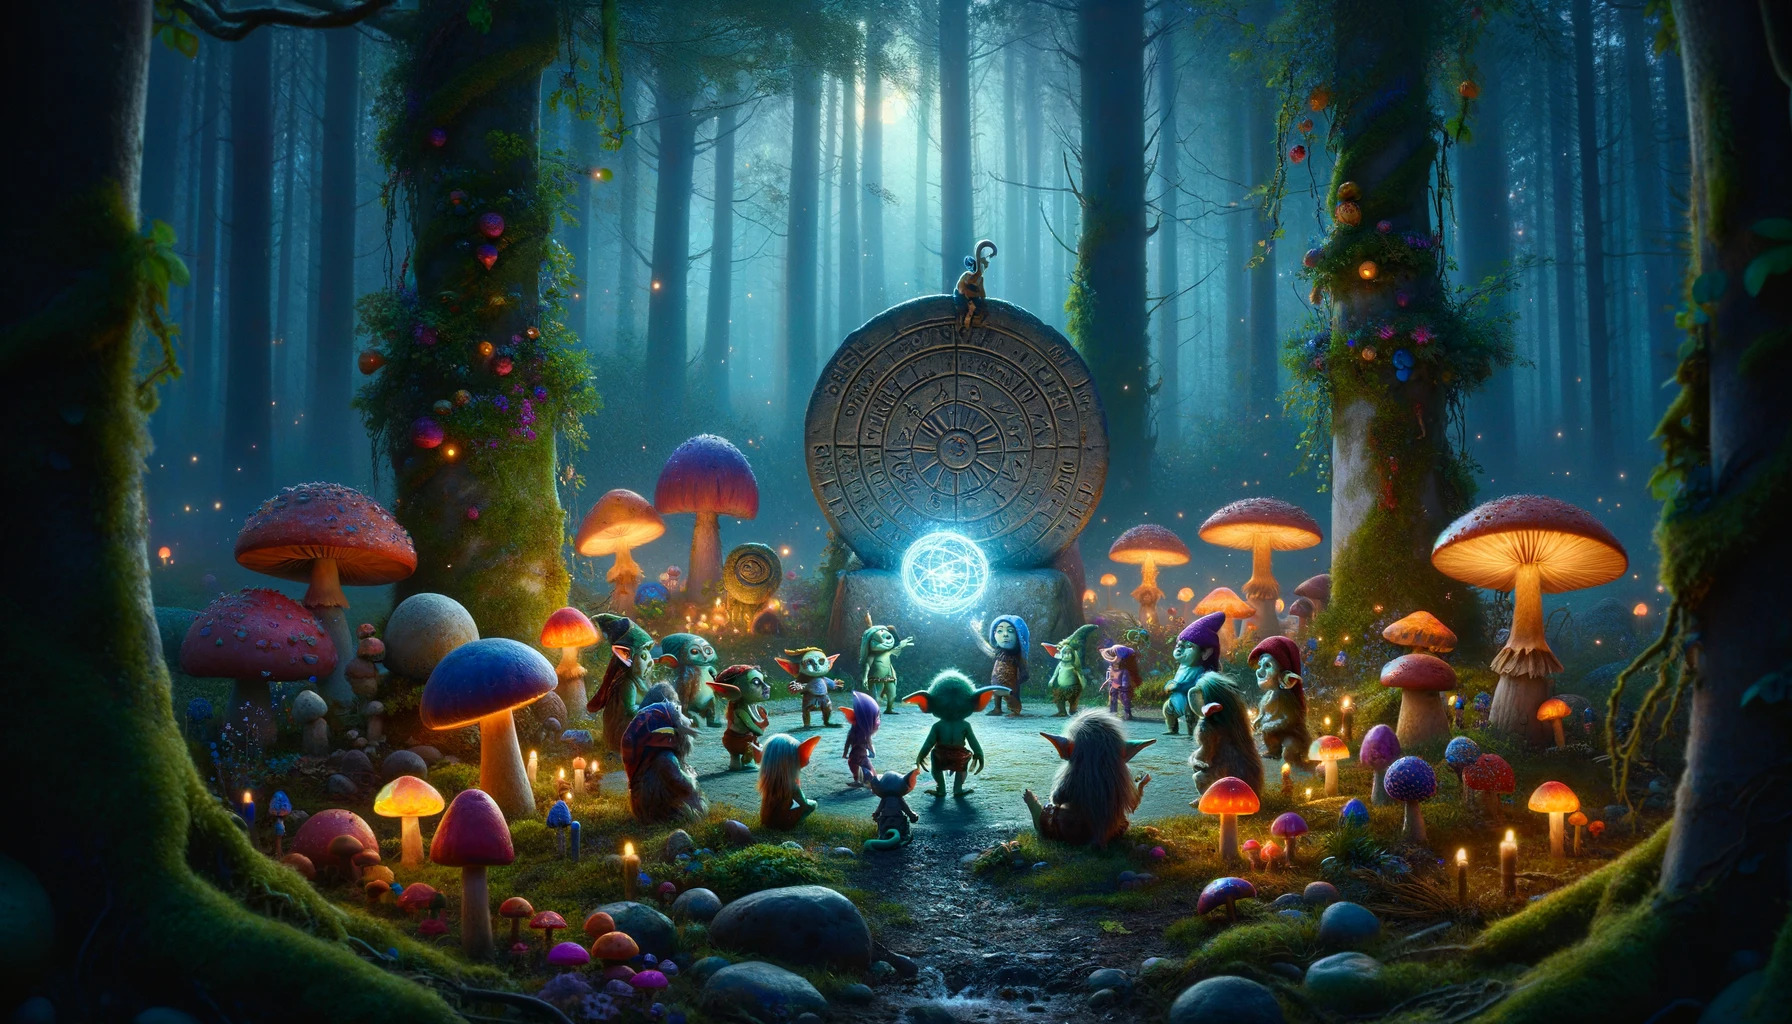 a cinematic image inspired by the essence of a goblin name generator. It captures a whimsical and enchanting scene set in a mystical forest, with a group of unique goblins engaged in a magical ritual. Let your imagination explore this magical world.